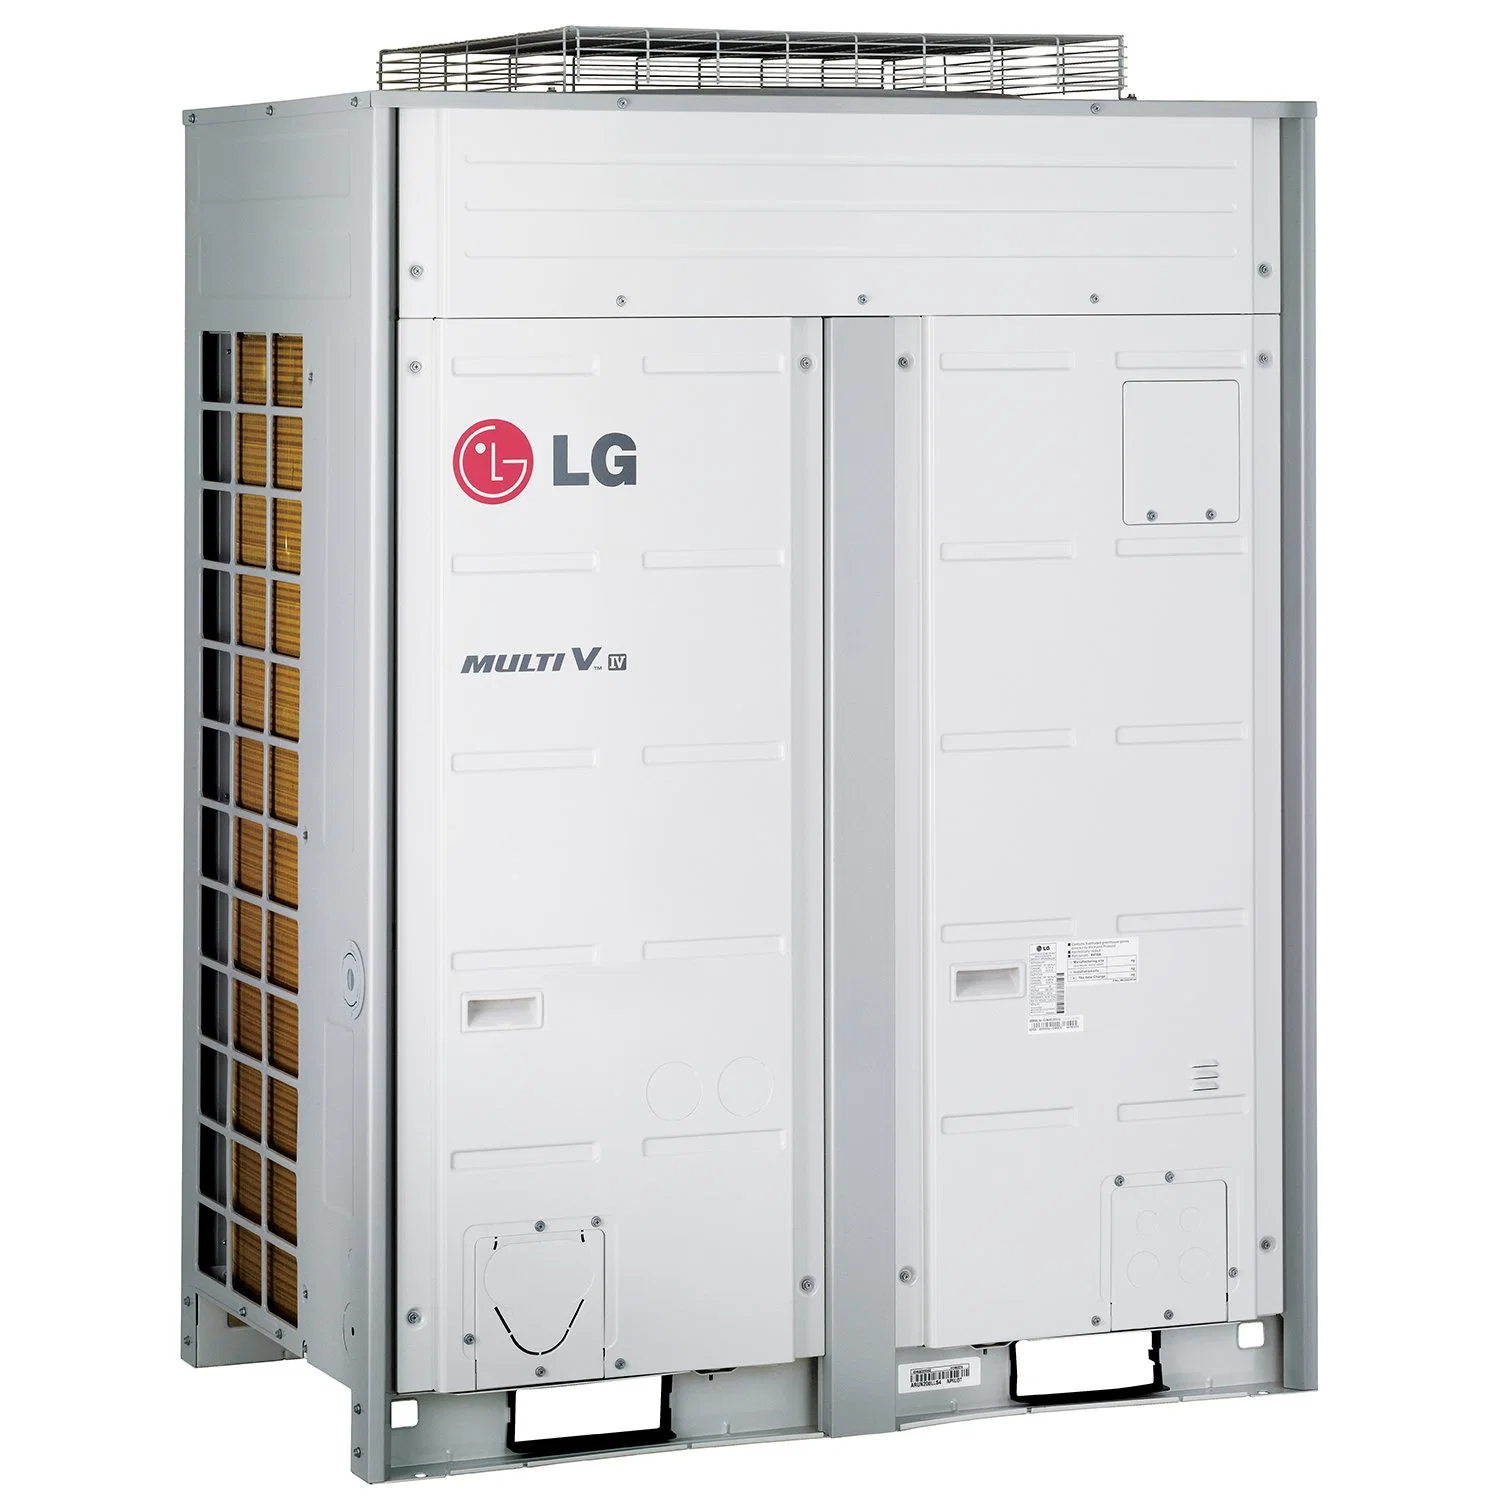 LG Industrial Air Conditioners Air Coller Cooling System